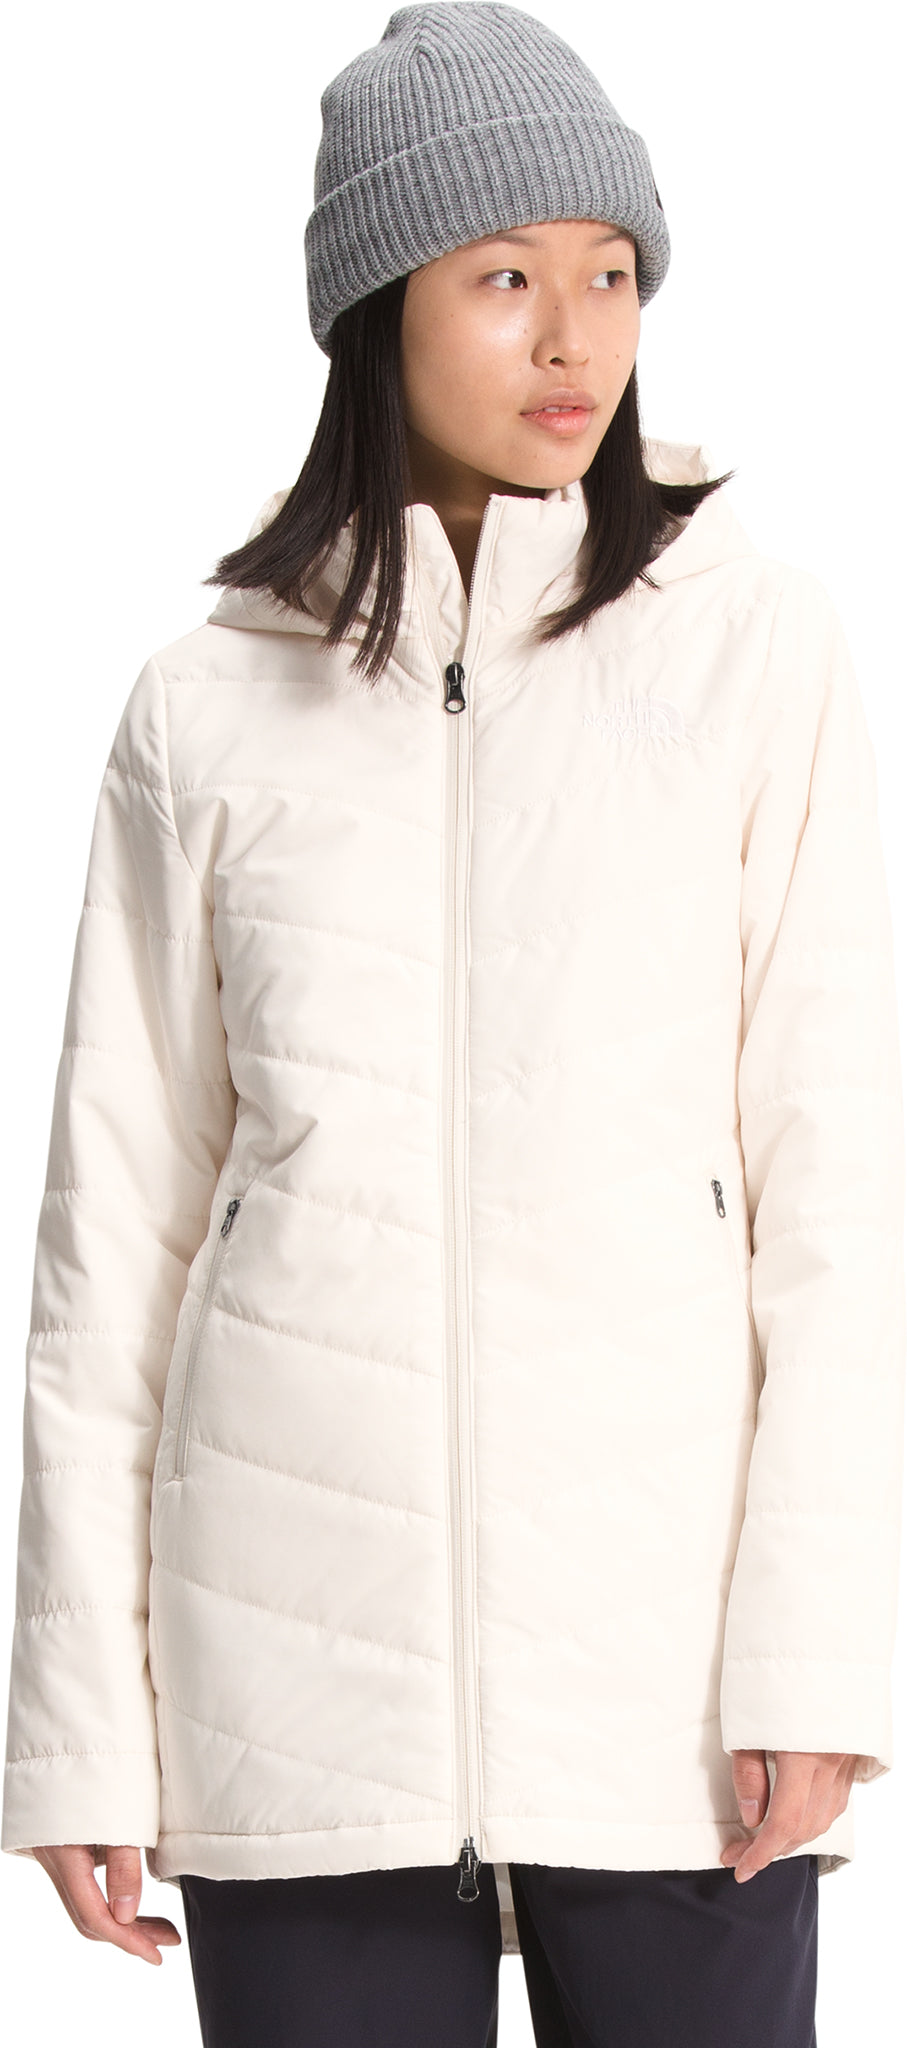 parka grand froid femme north face